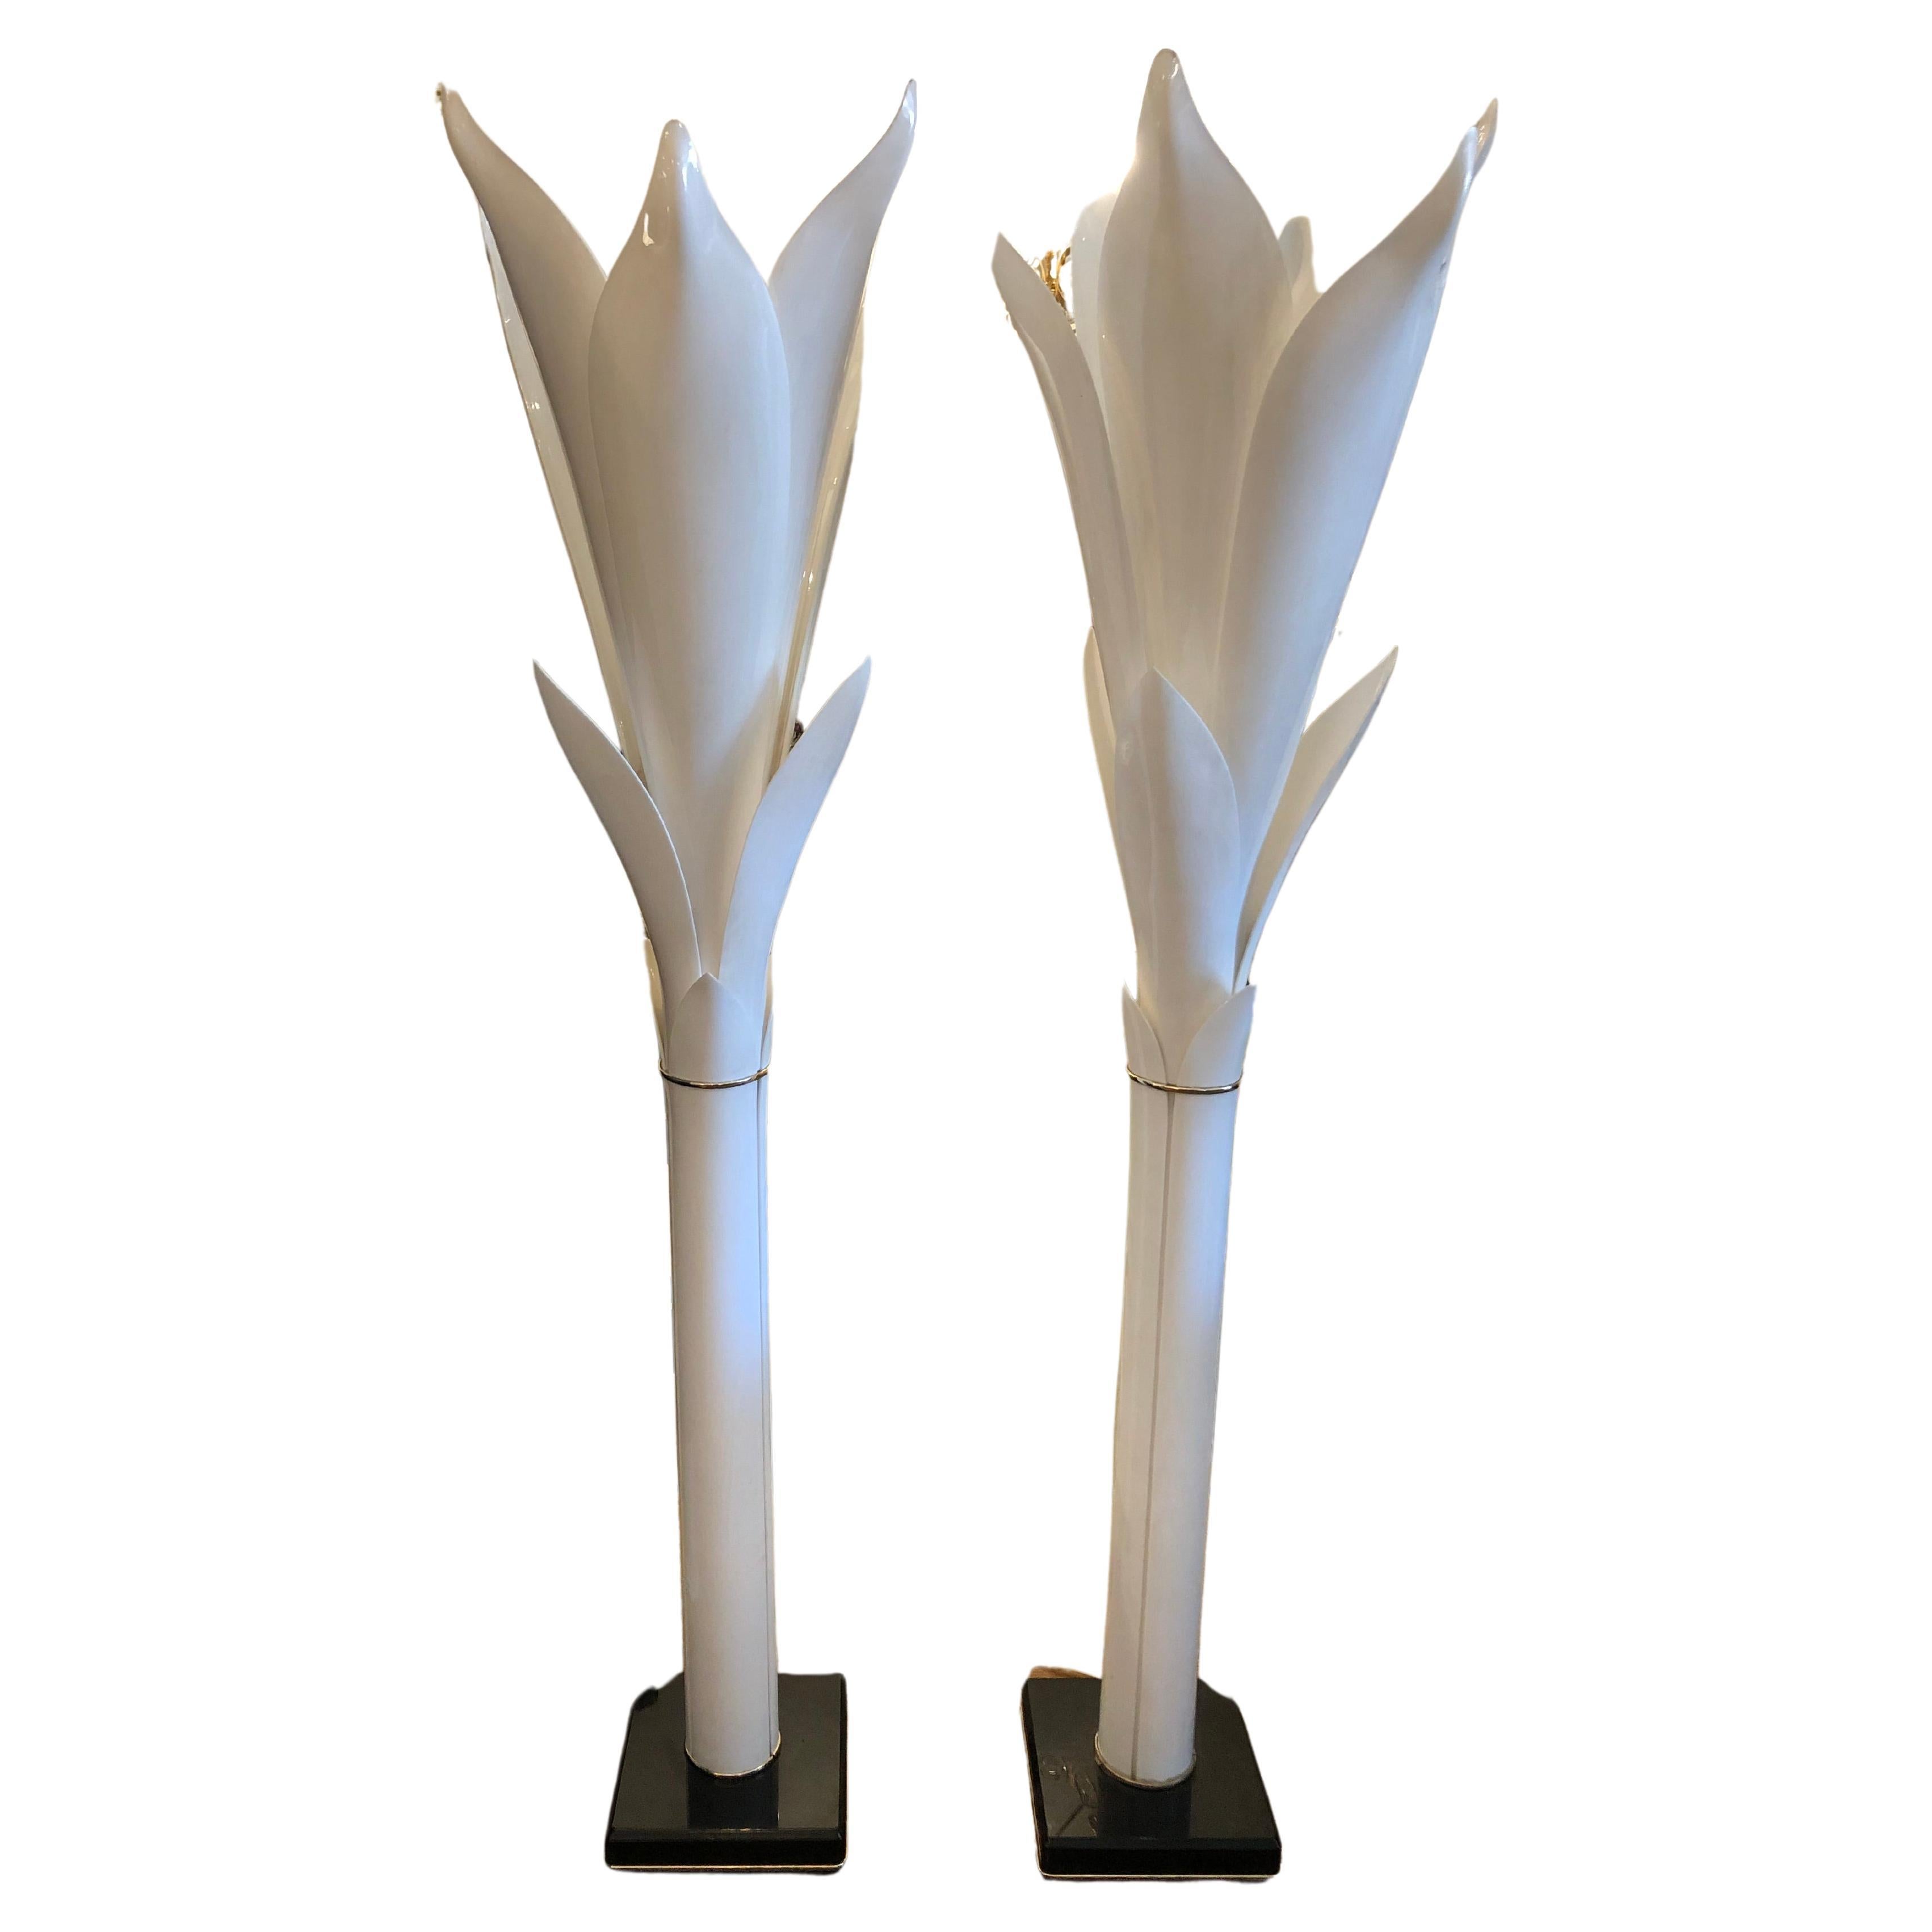 Glamorous Pair Roger Rougier Life Size Moulded White Acrylic Petal Floor Lamps For Sale